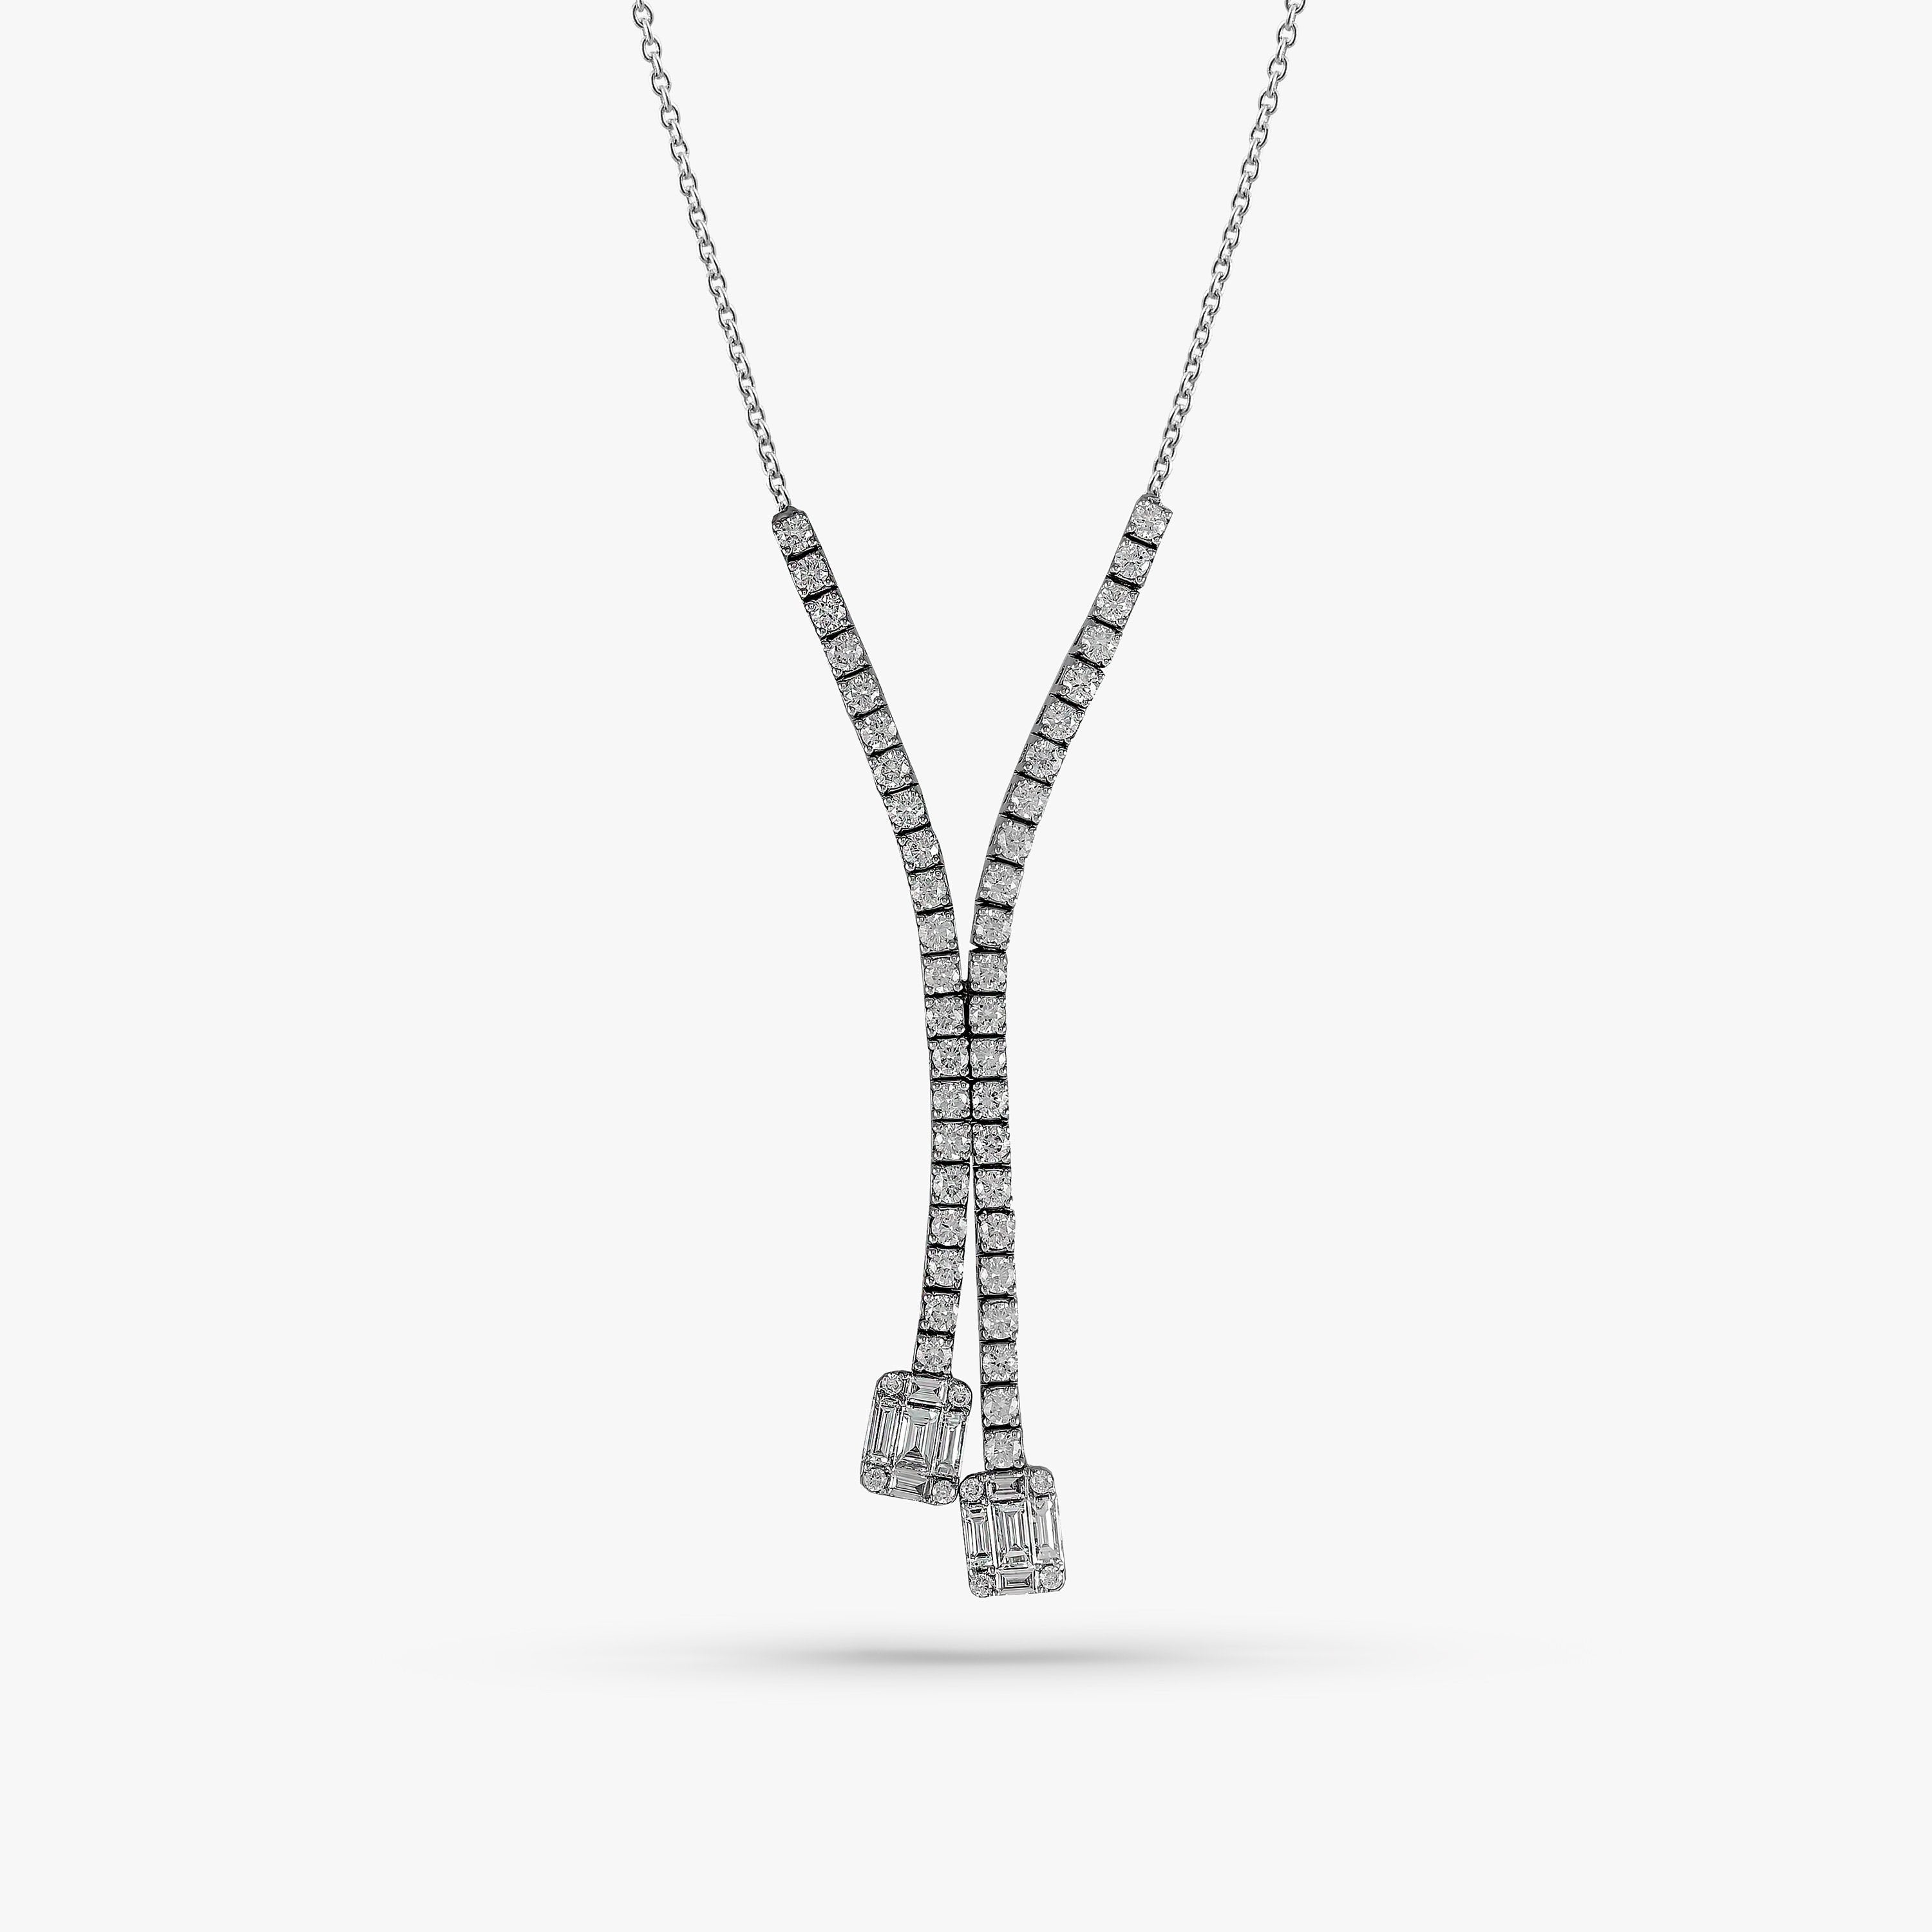 Double Diamond Necklace in 14K White Gold